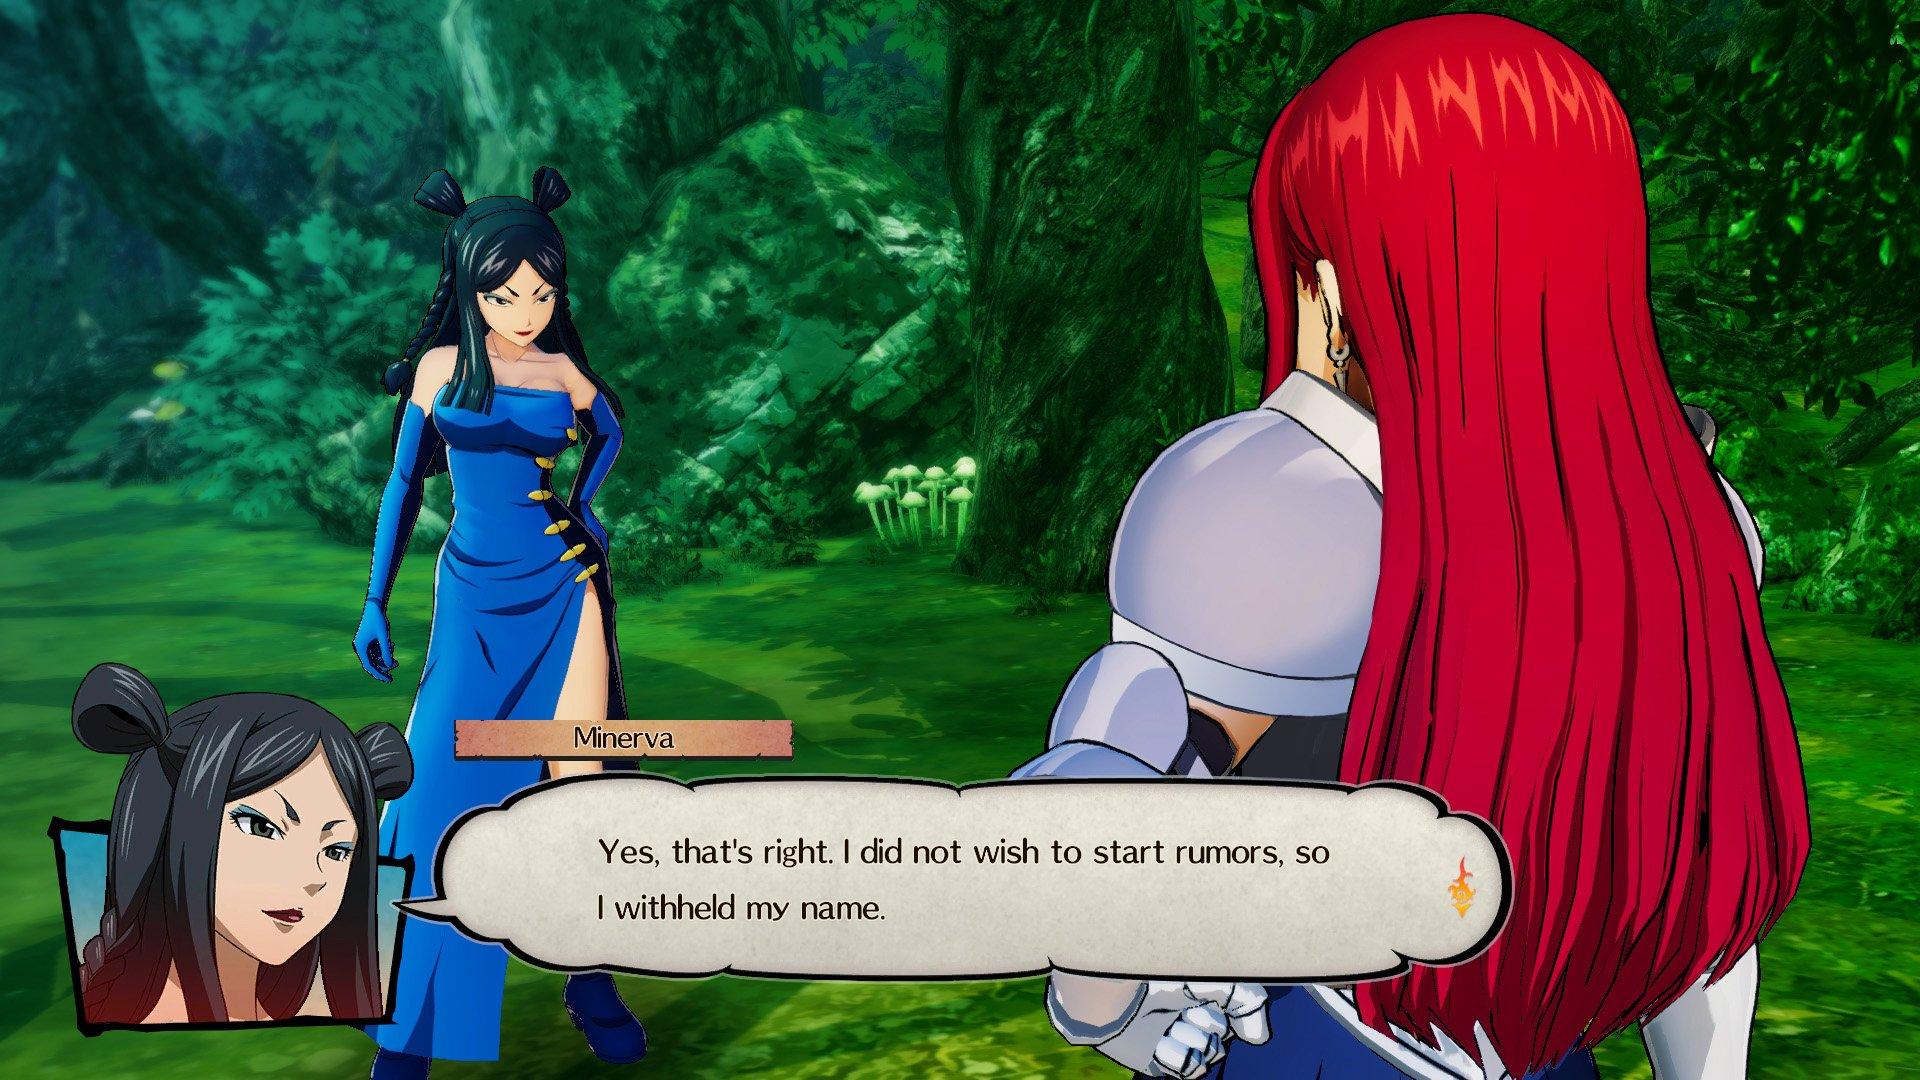 Fairy Tail (video game) - Wikipedia